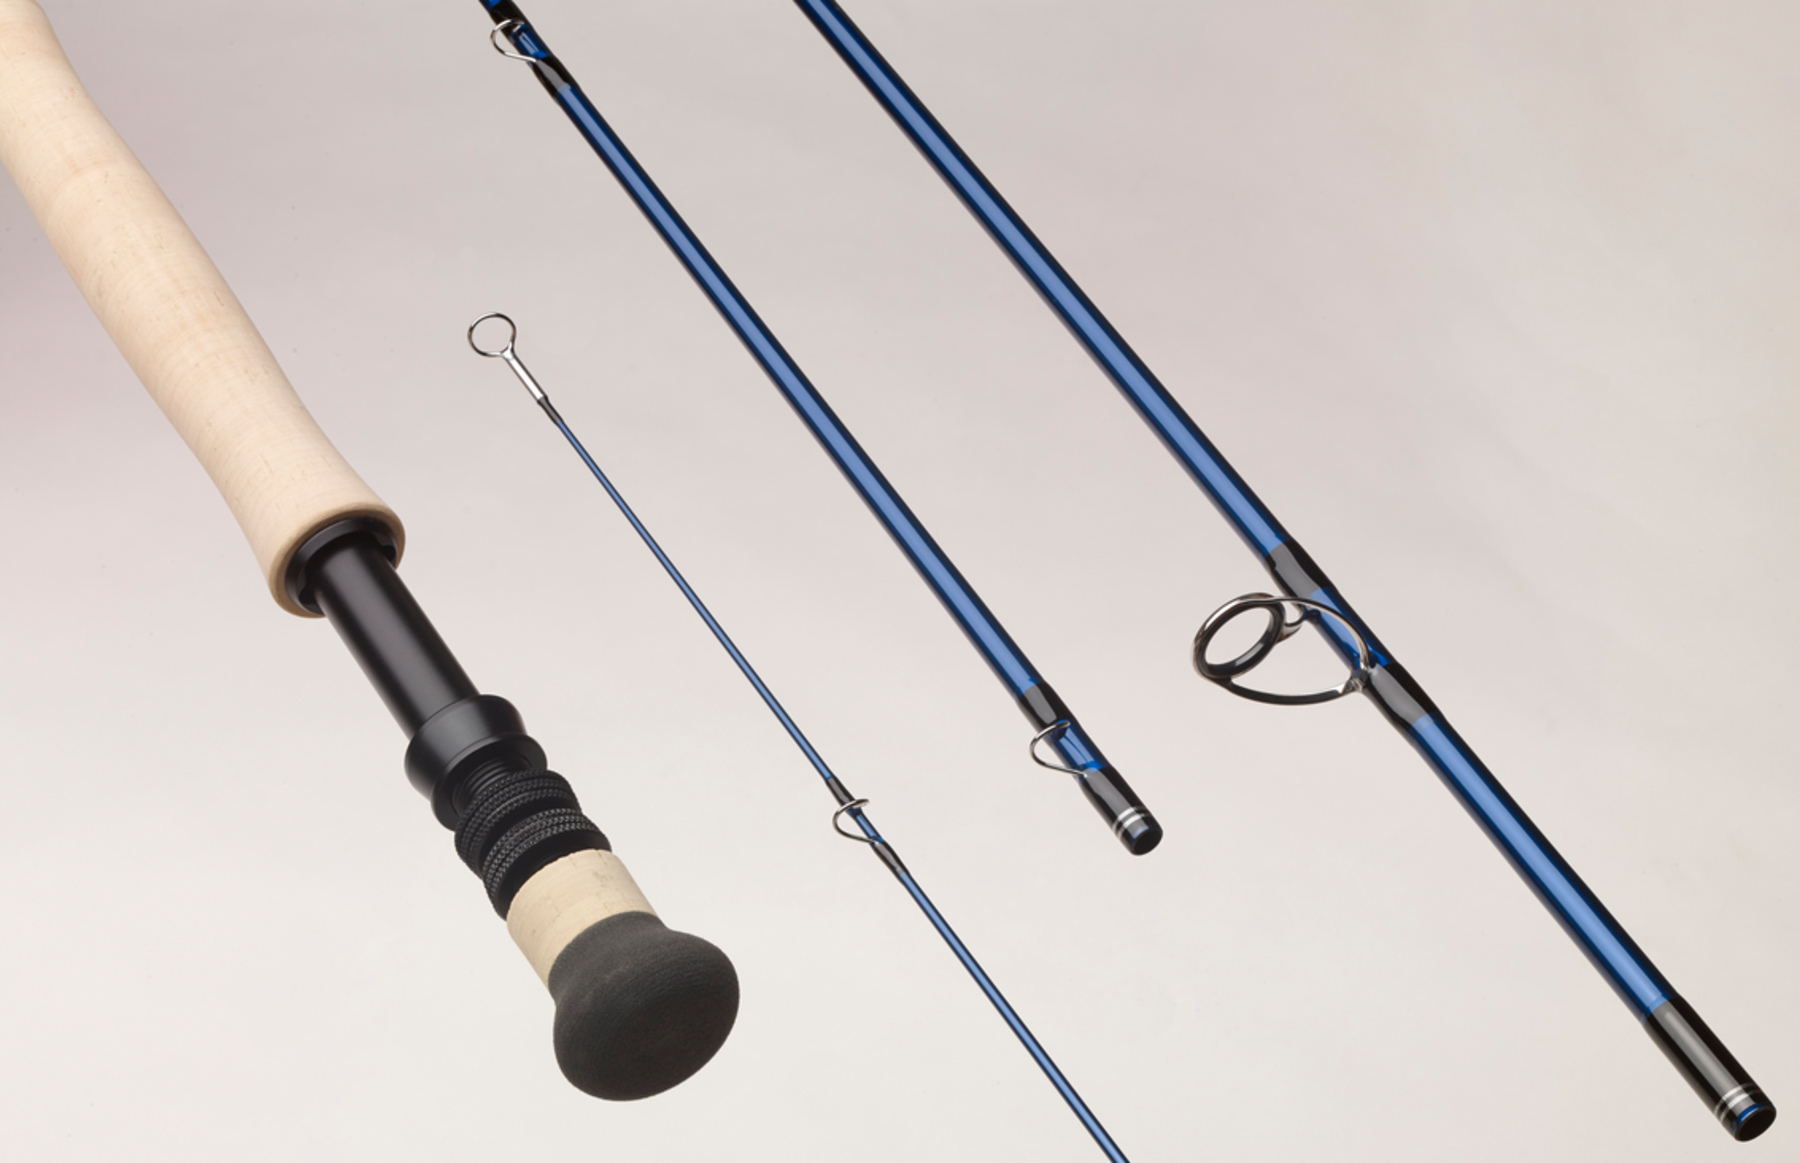 Sage Intros SALT and ACCEL Fly Rods, 'Reinvents' G5 Technology